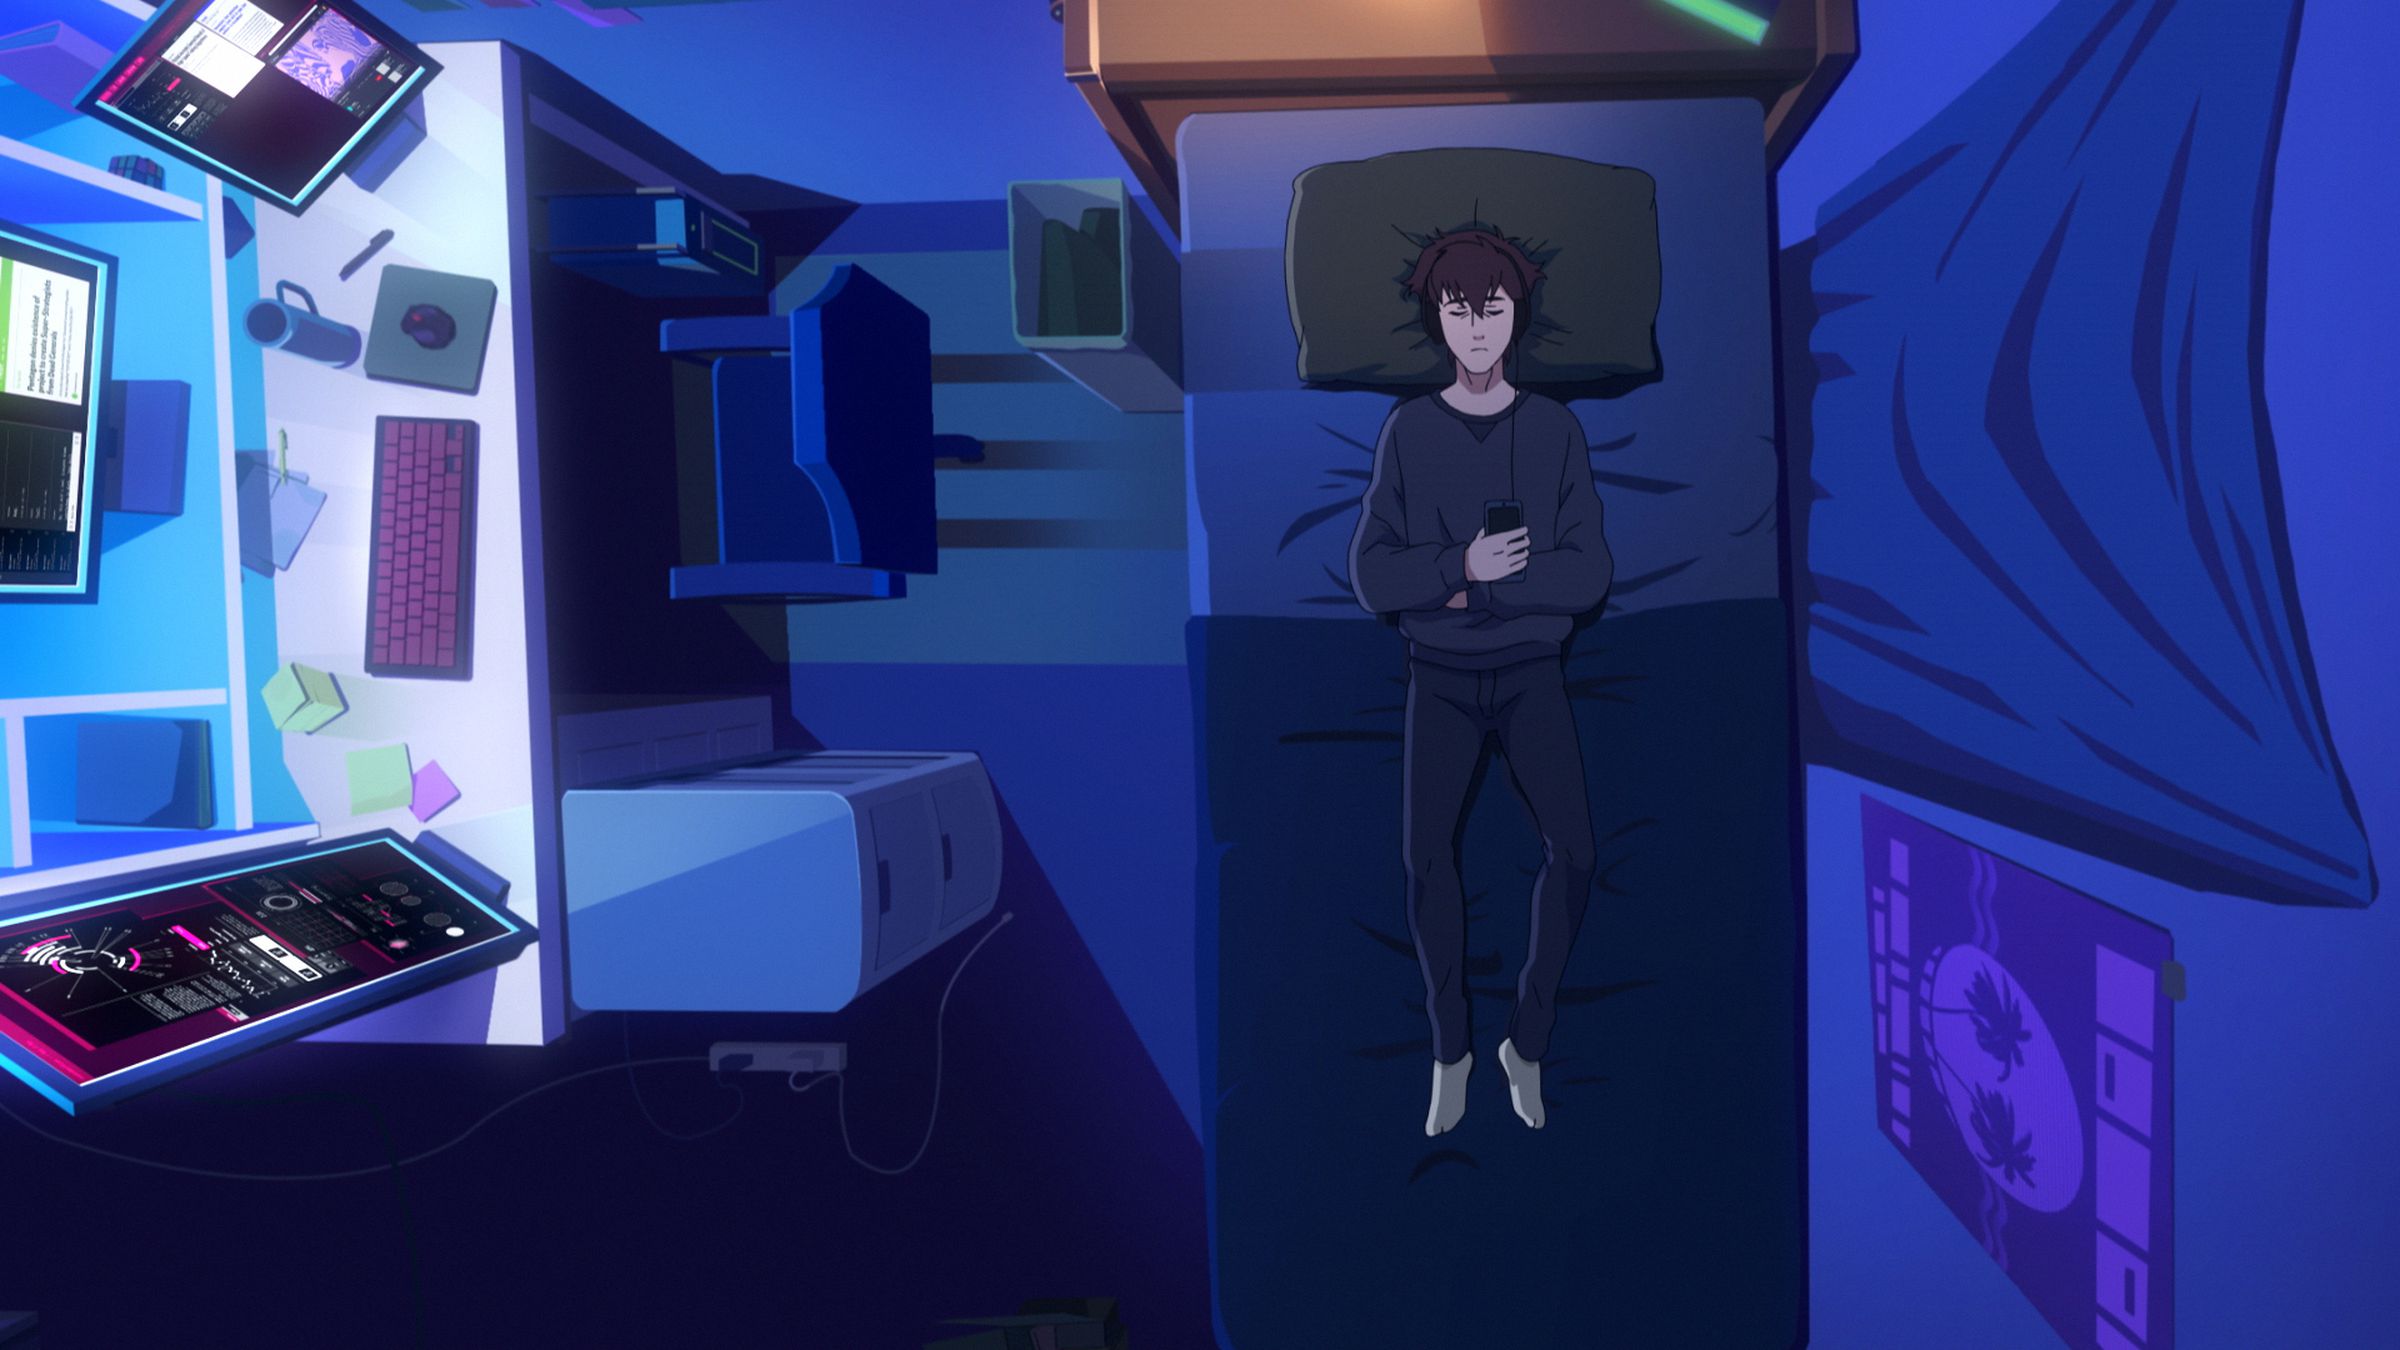 An overhead shot of a boy lying on his bed in a dark room lit only by the screens of his computer setup to the side of him.